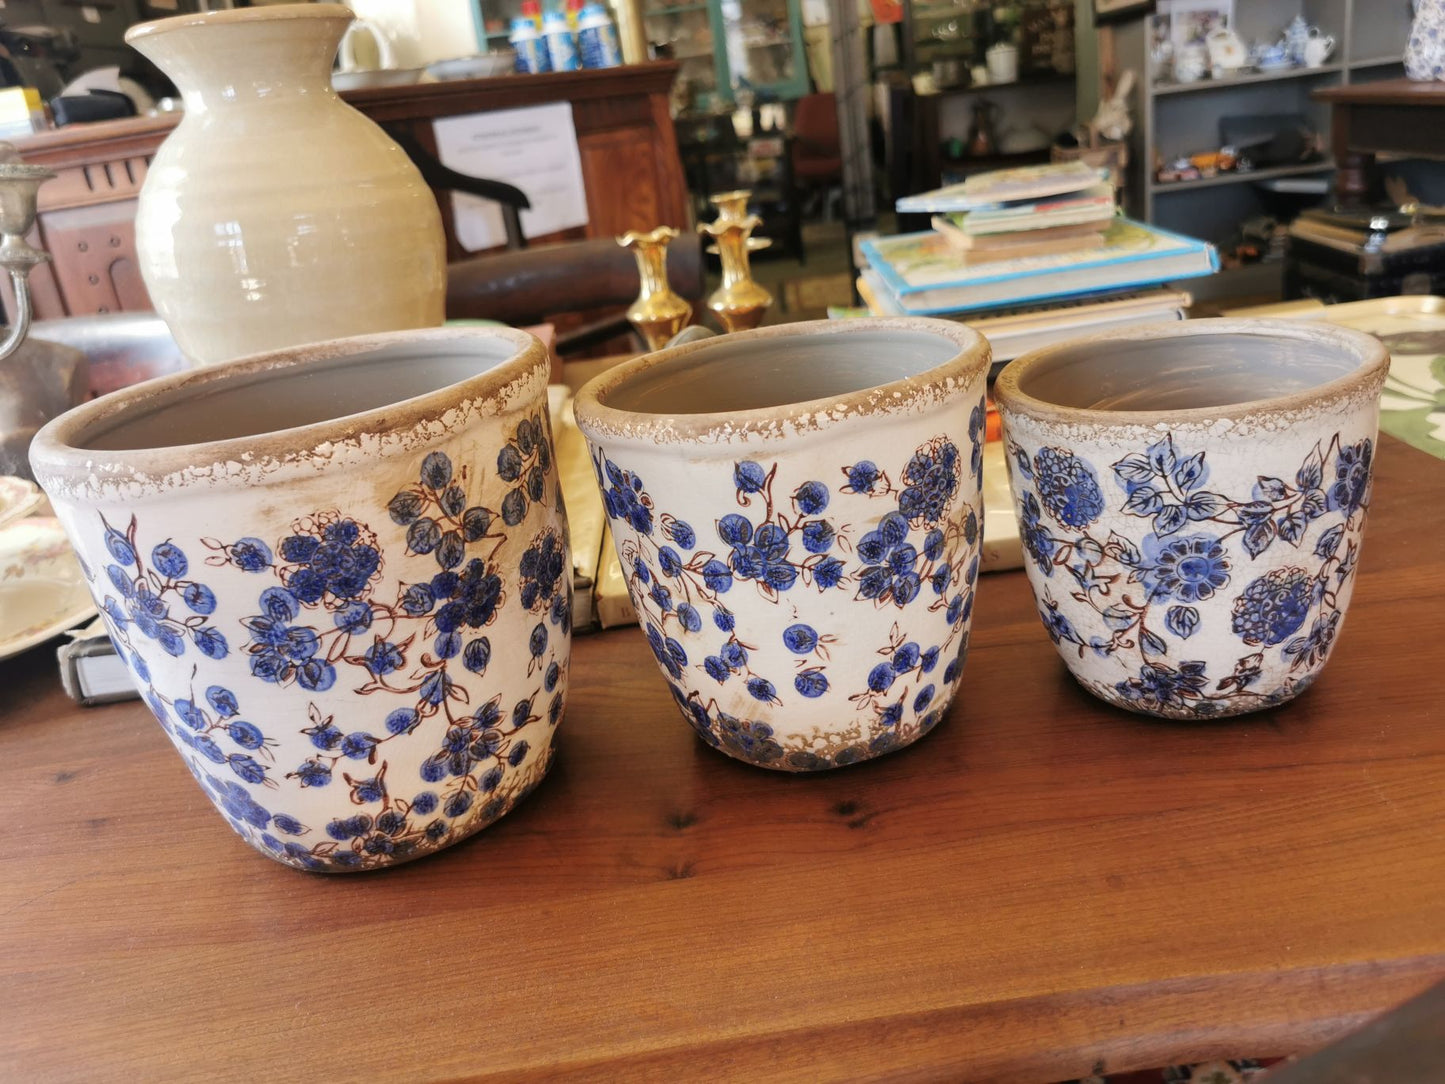 Ceramic pot - blue and brown flowers